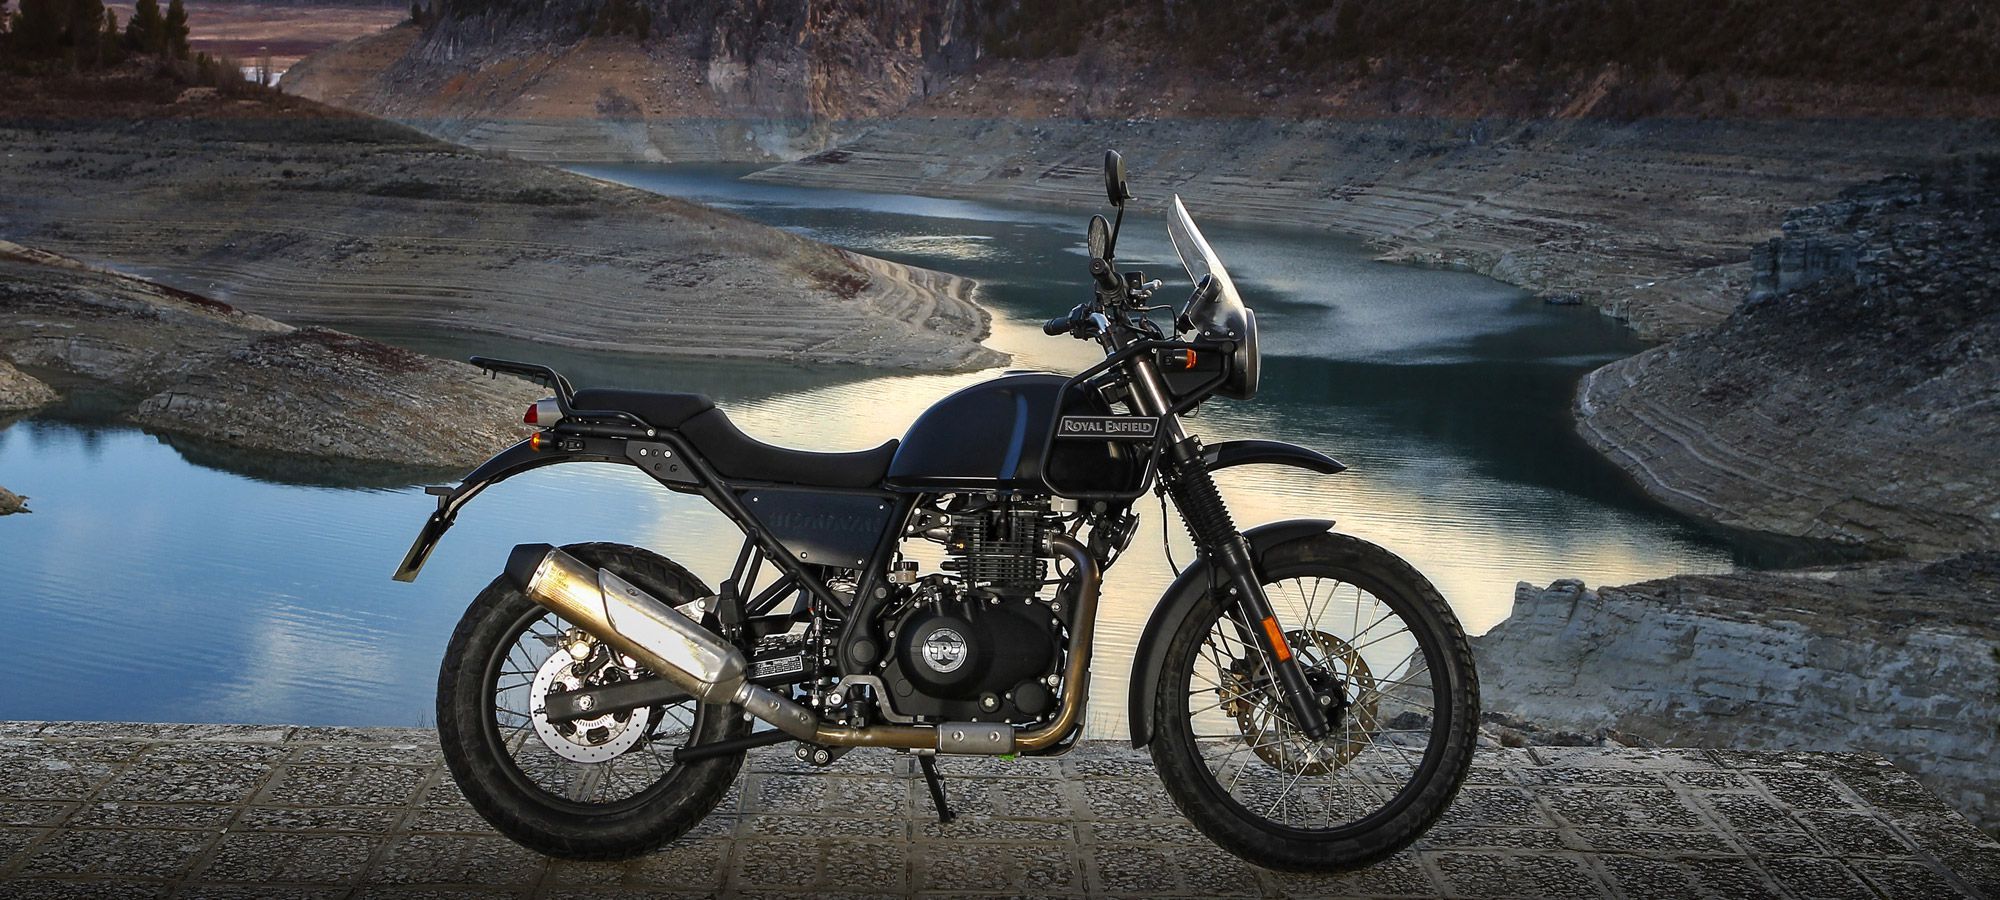 The Royal Enfield Himalayan Is An ADV Bike For A New World. Cycle